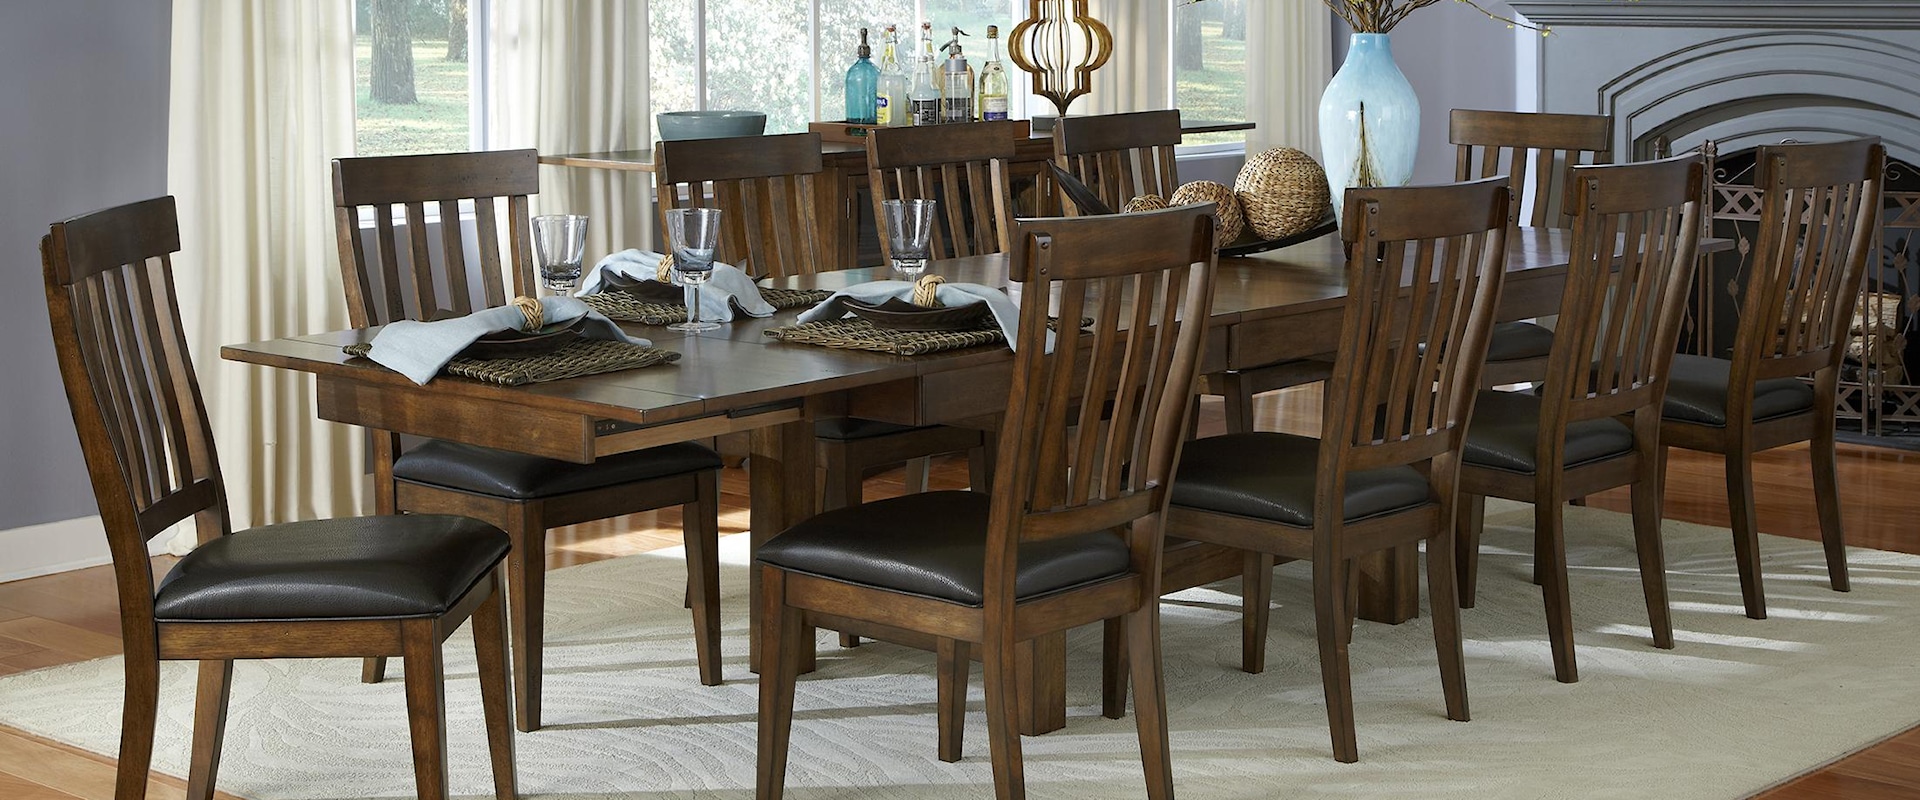 11 Piece Trestle Table and Slatback Chairs Set